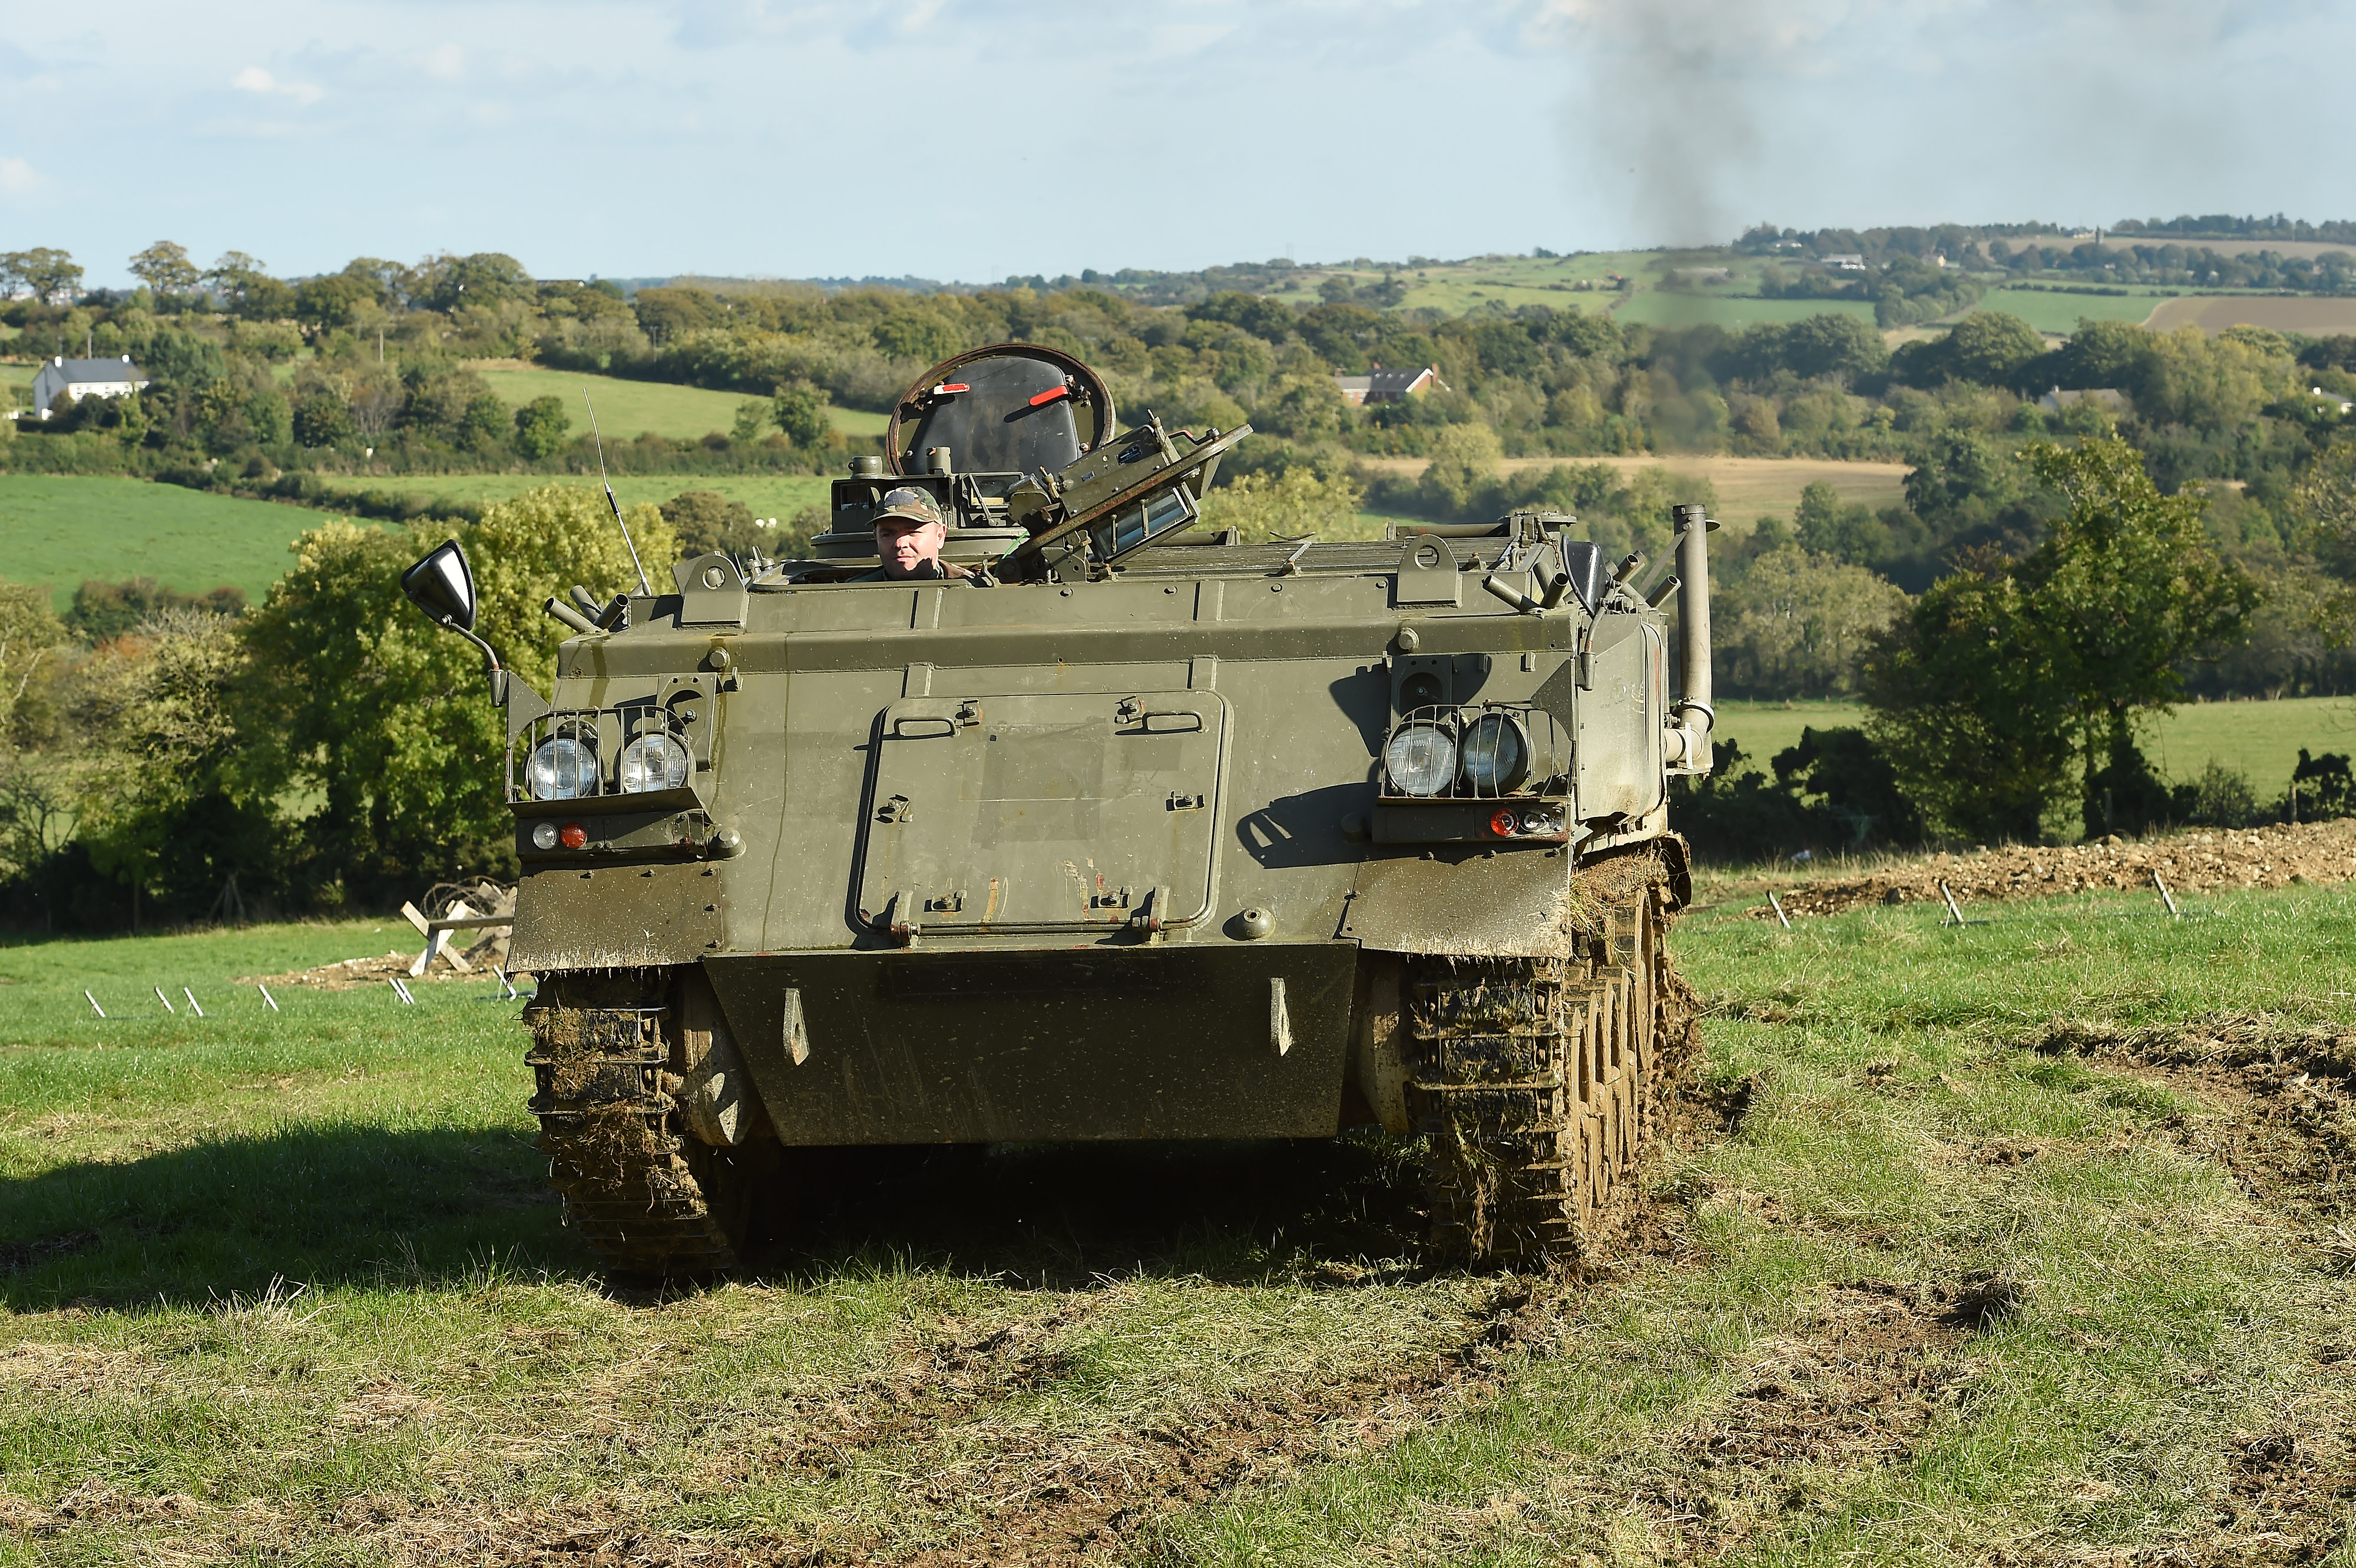 Colm Brereton in the FV432 is the armoured personnel carrier